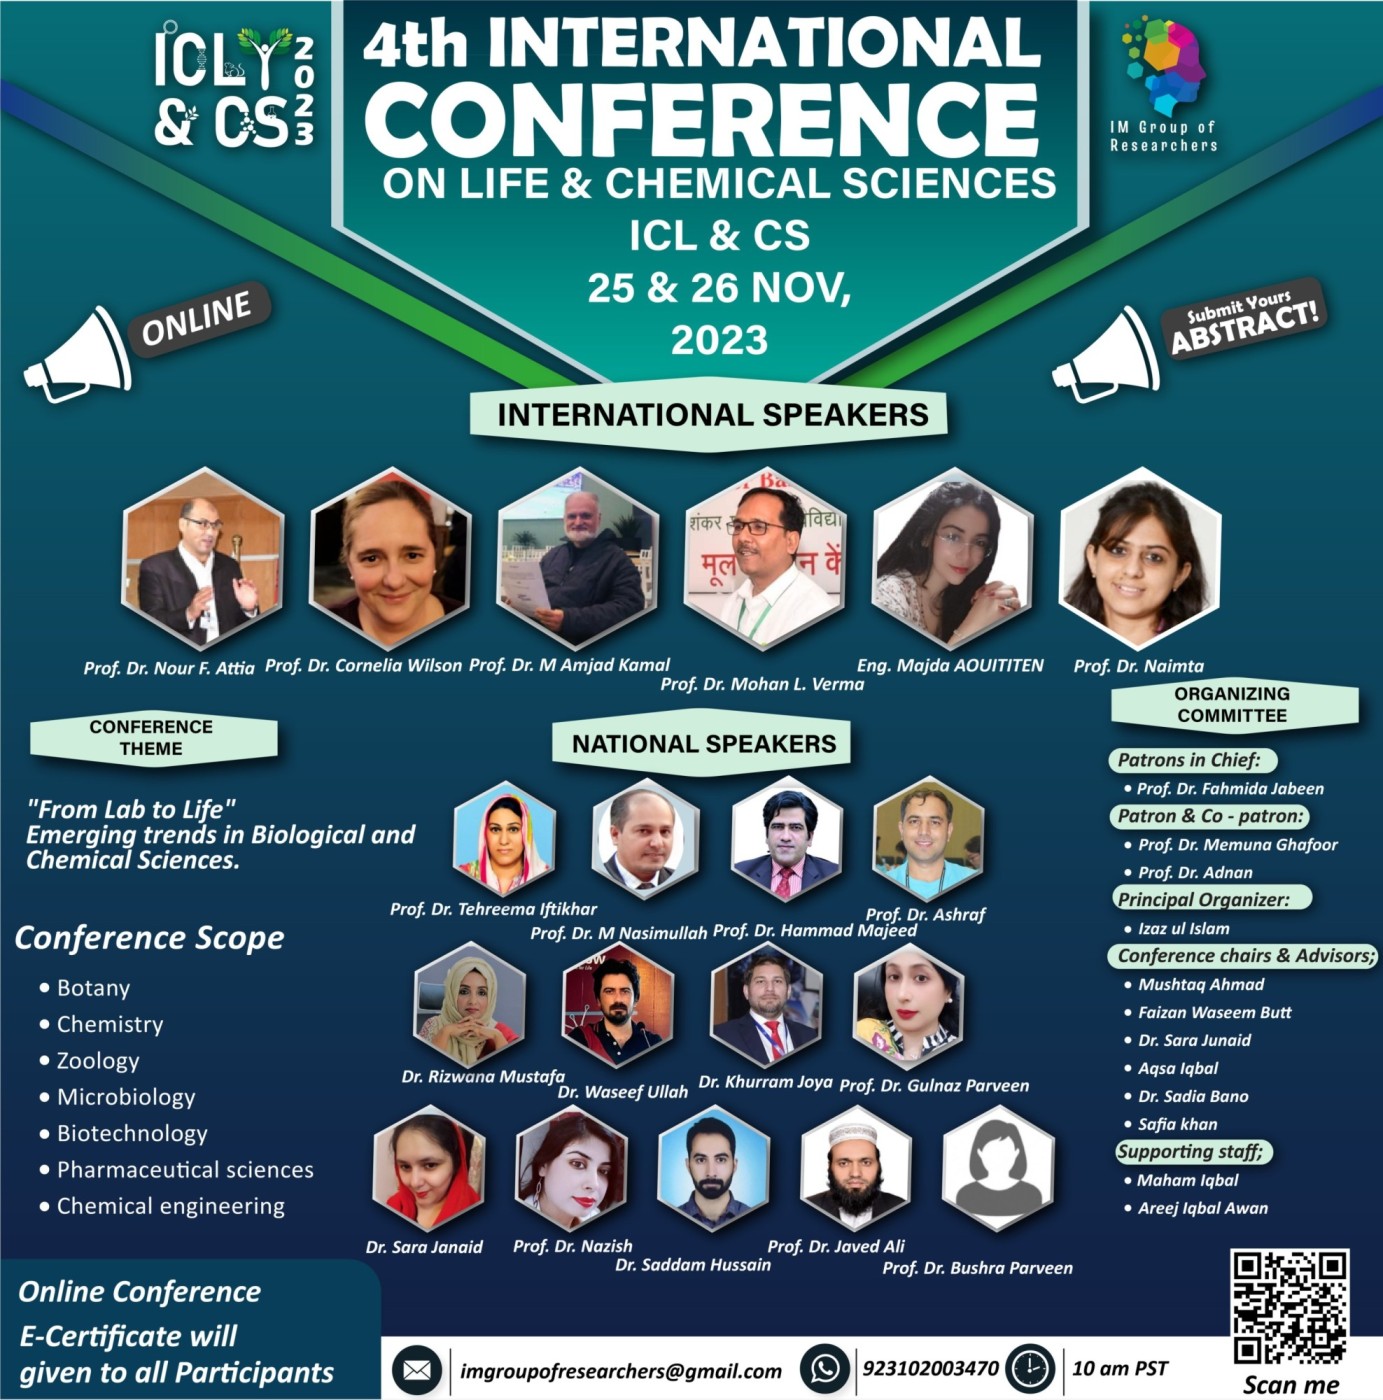 4th INTERNATIONAL CONFERENCE ON LIFE AND CHEMICAL SCIENCES